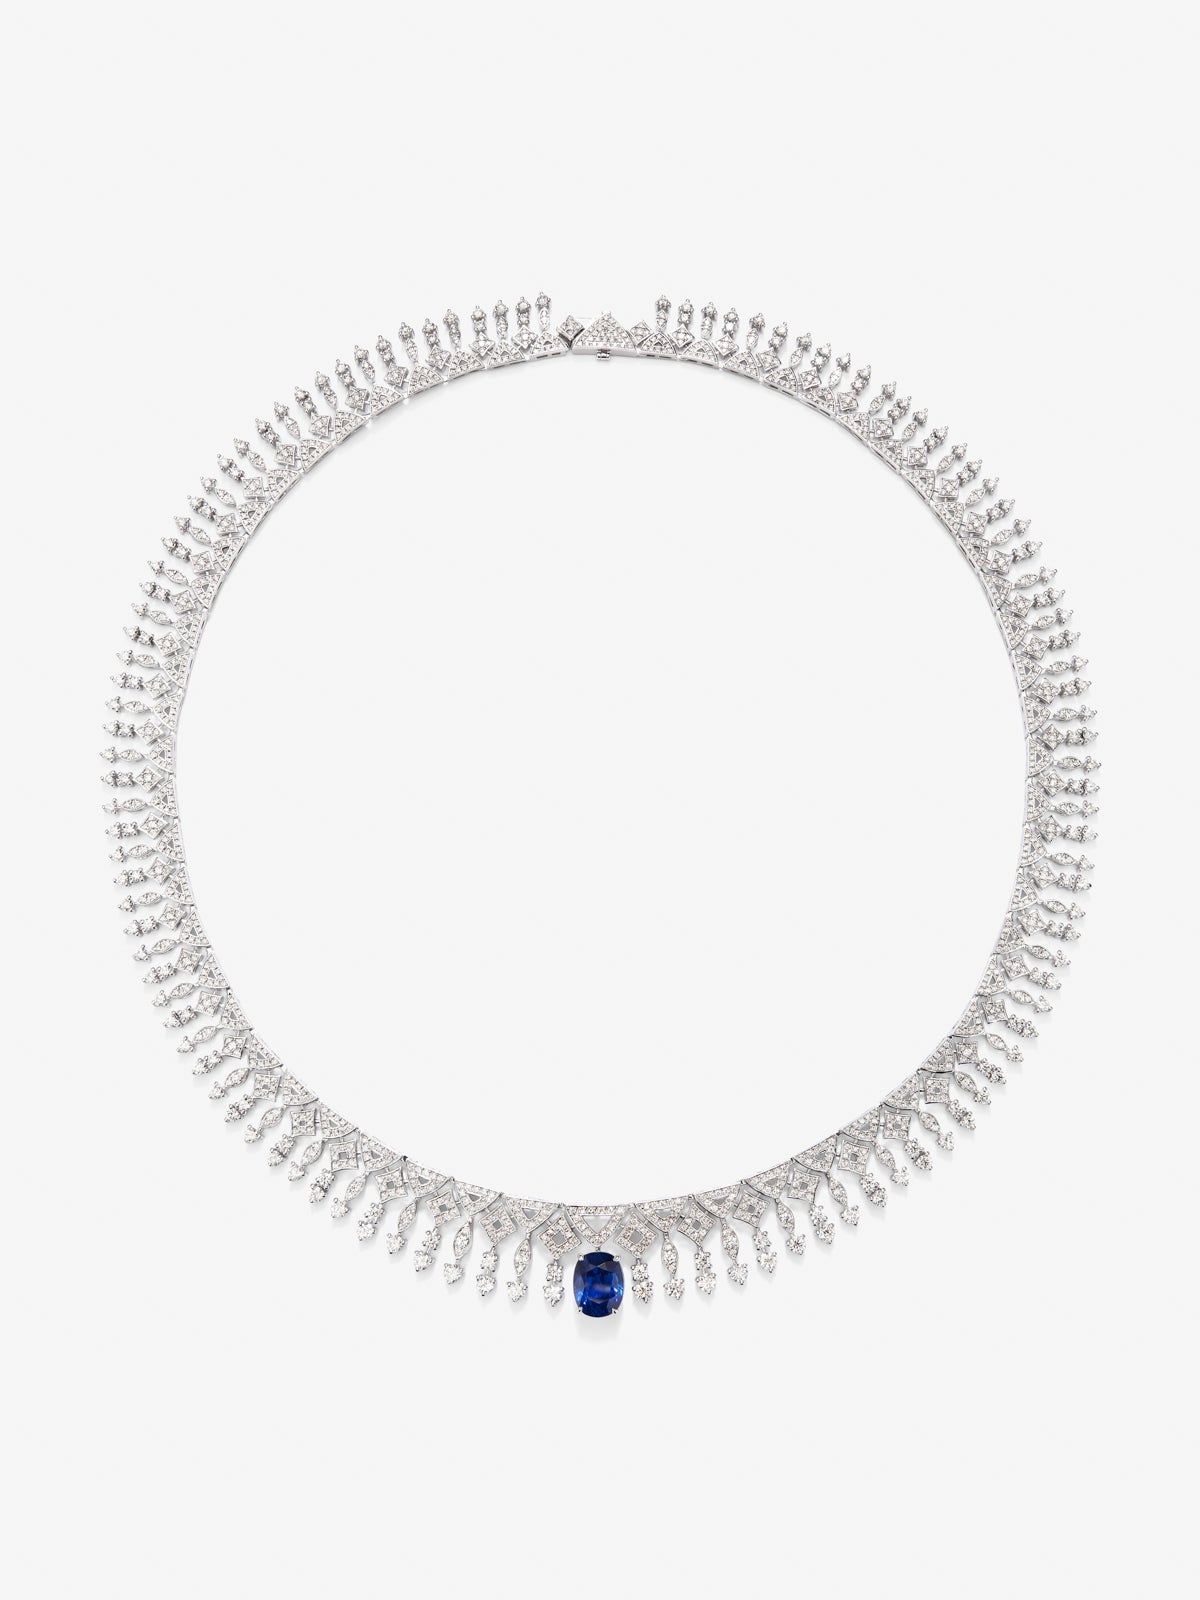 18K white gold necklace with Royal blue sapphire in 3.92 oval size and white diamonds of 9.27 cts